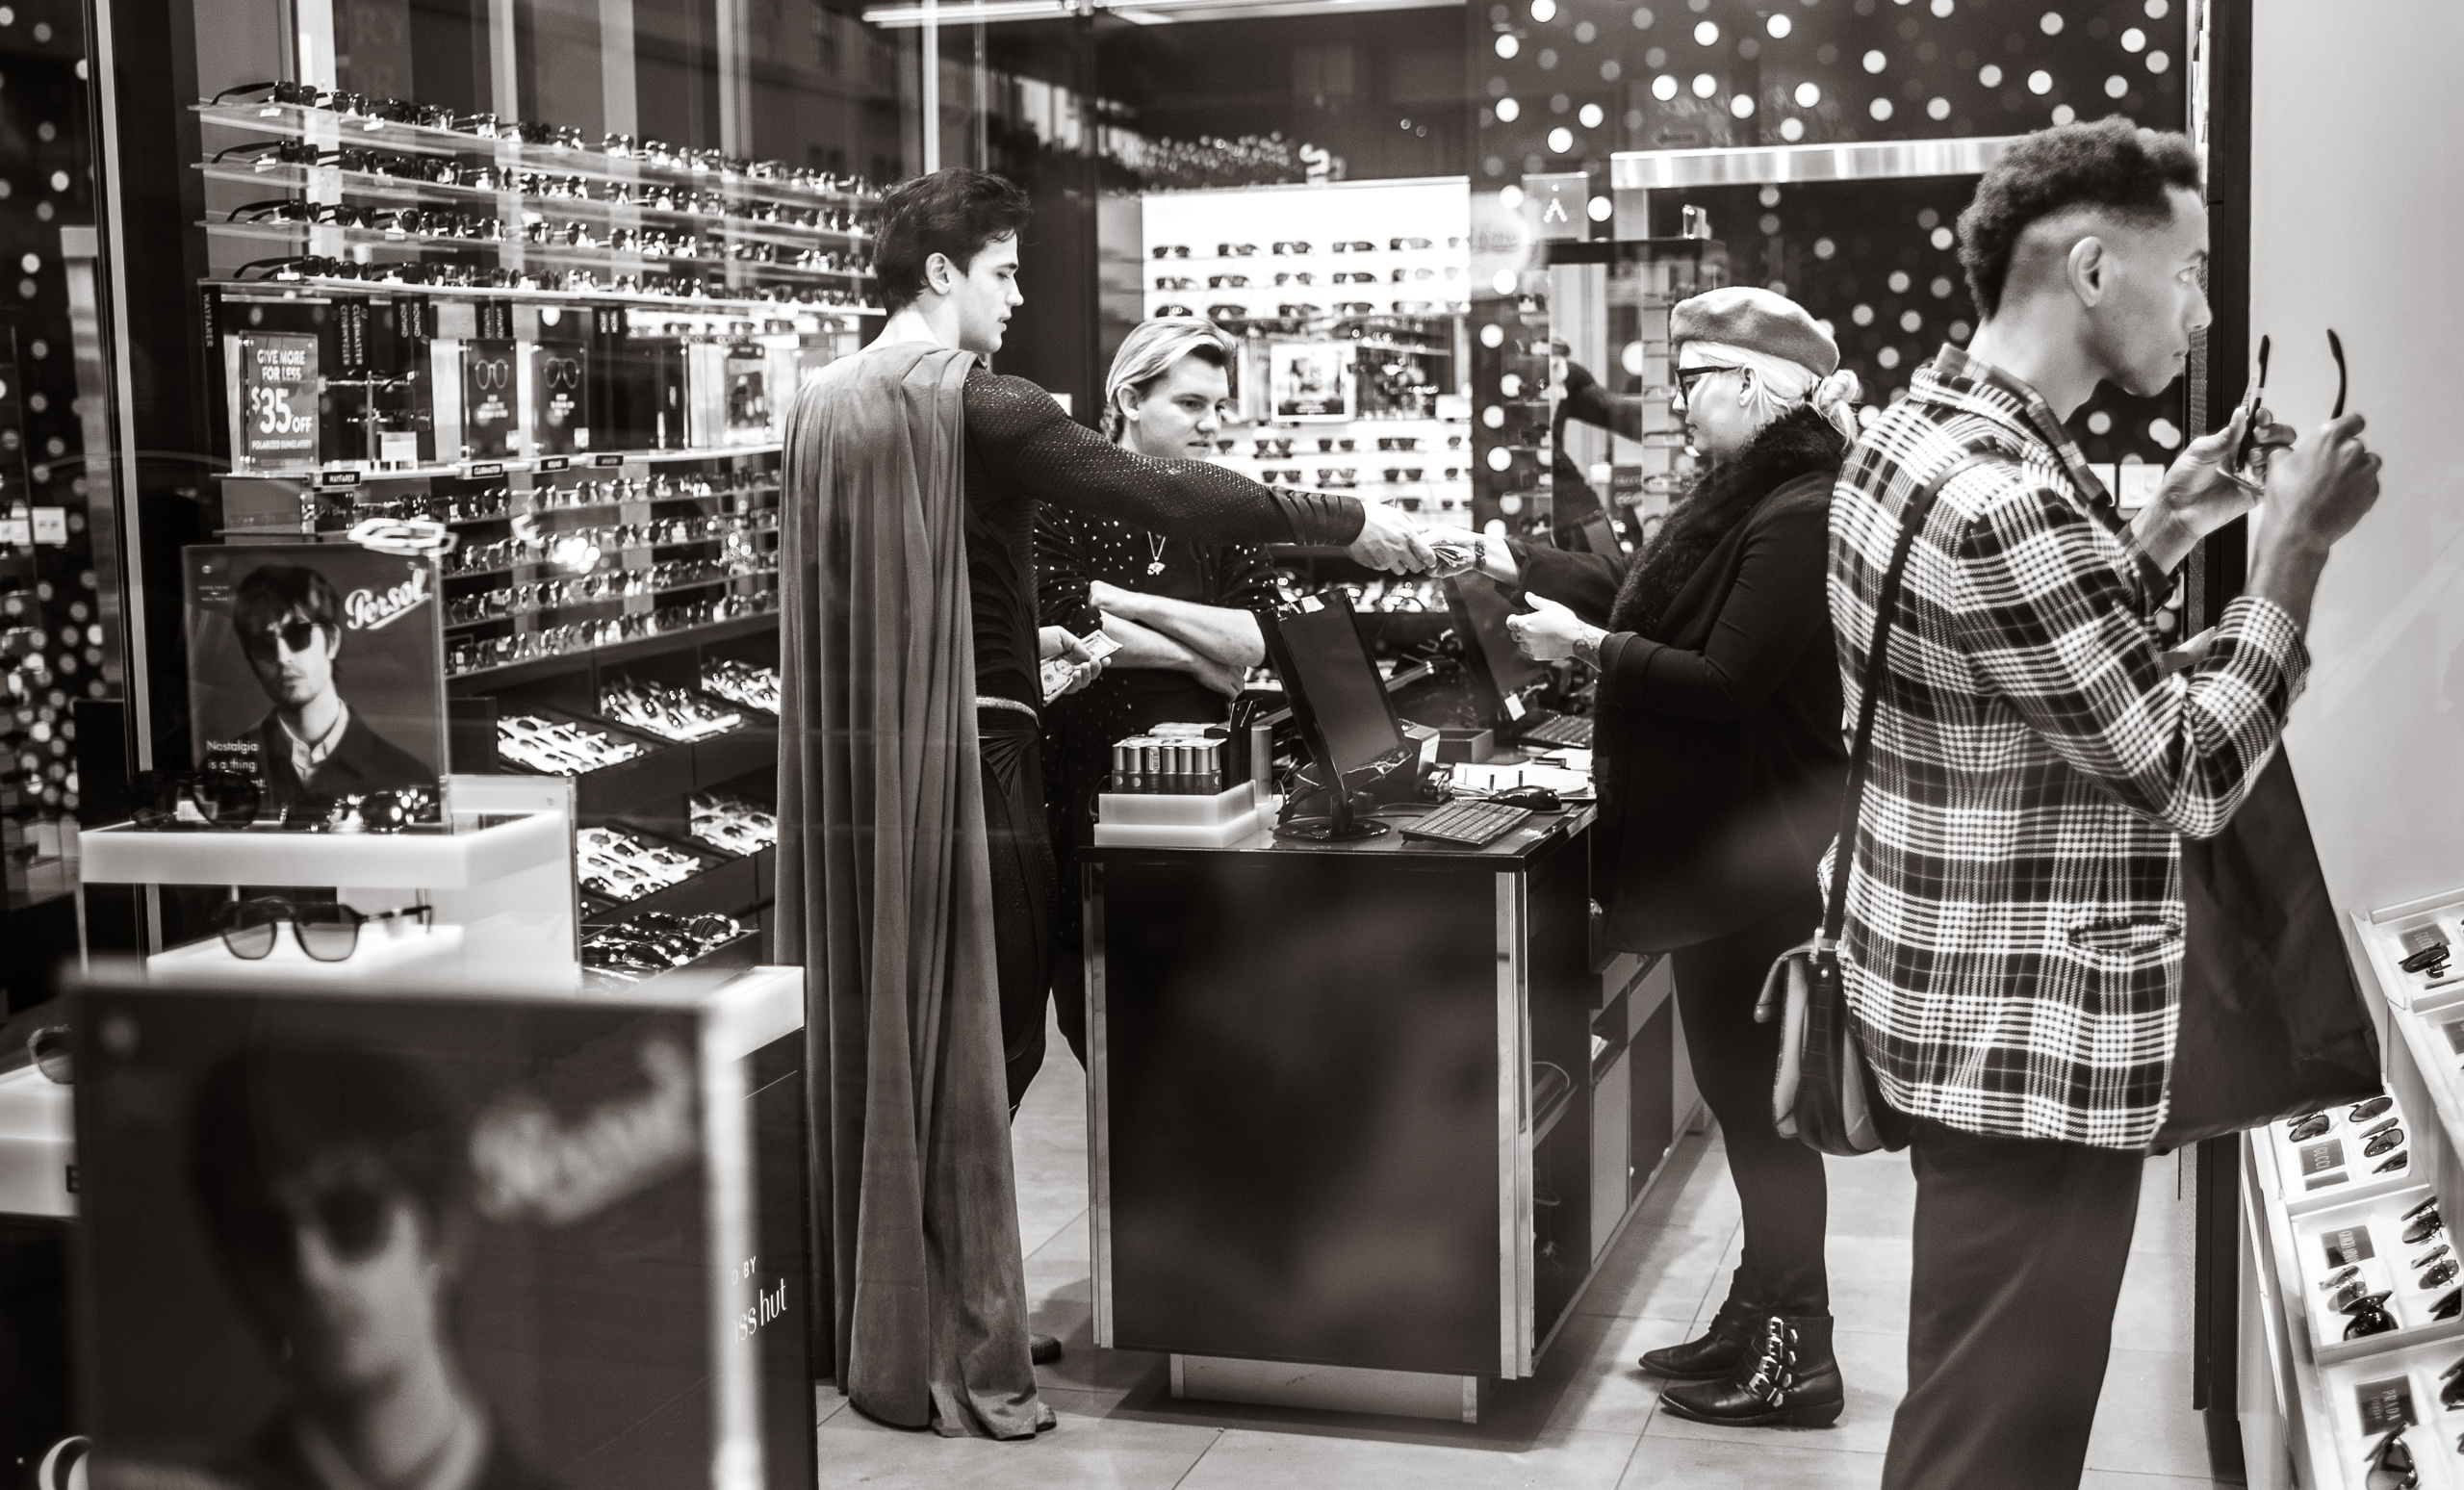 Superman character on Hollywood Blvd inside a sunglasses shop making a transaction with the clerk there